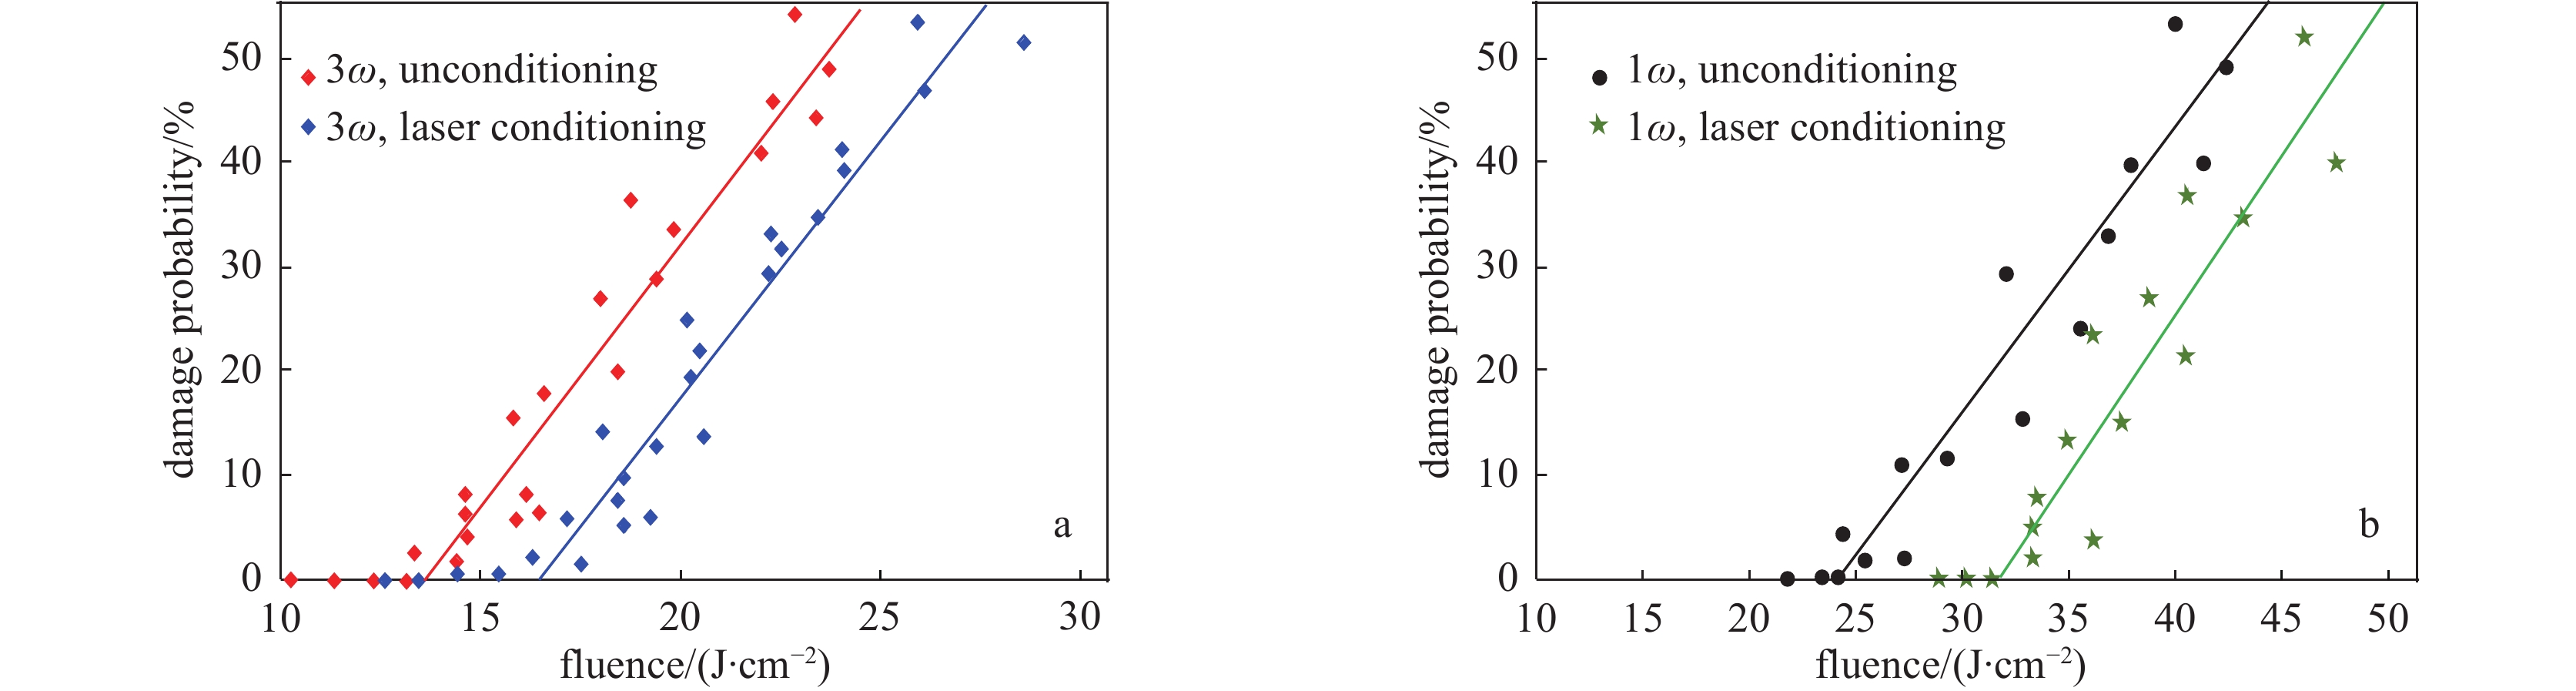 Damage probability curves of DKDP crystals before and after laser conditioning